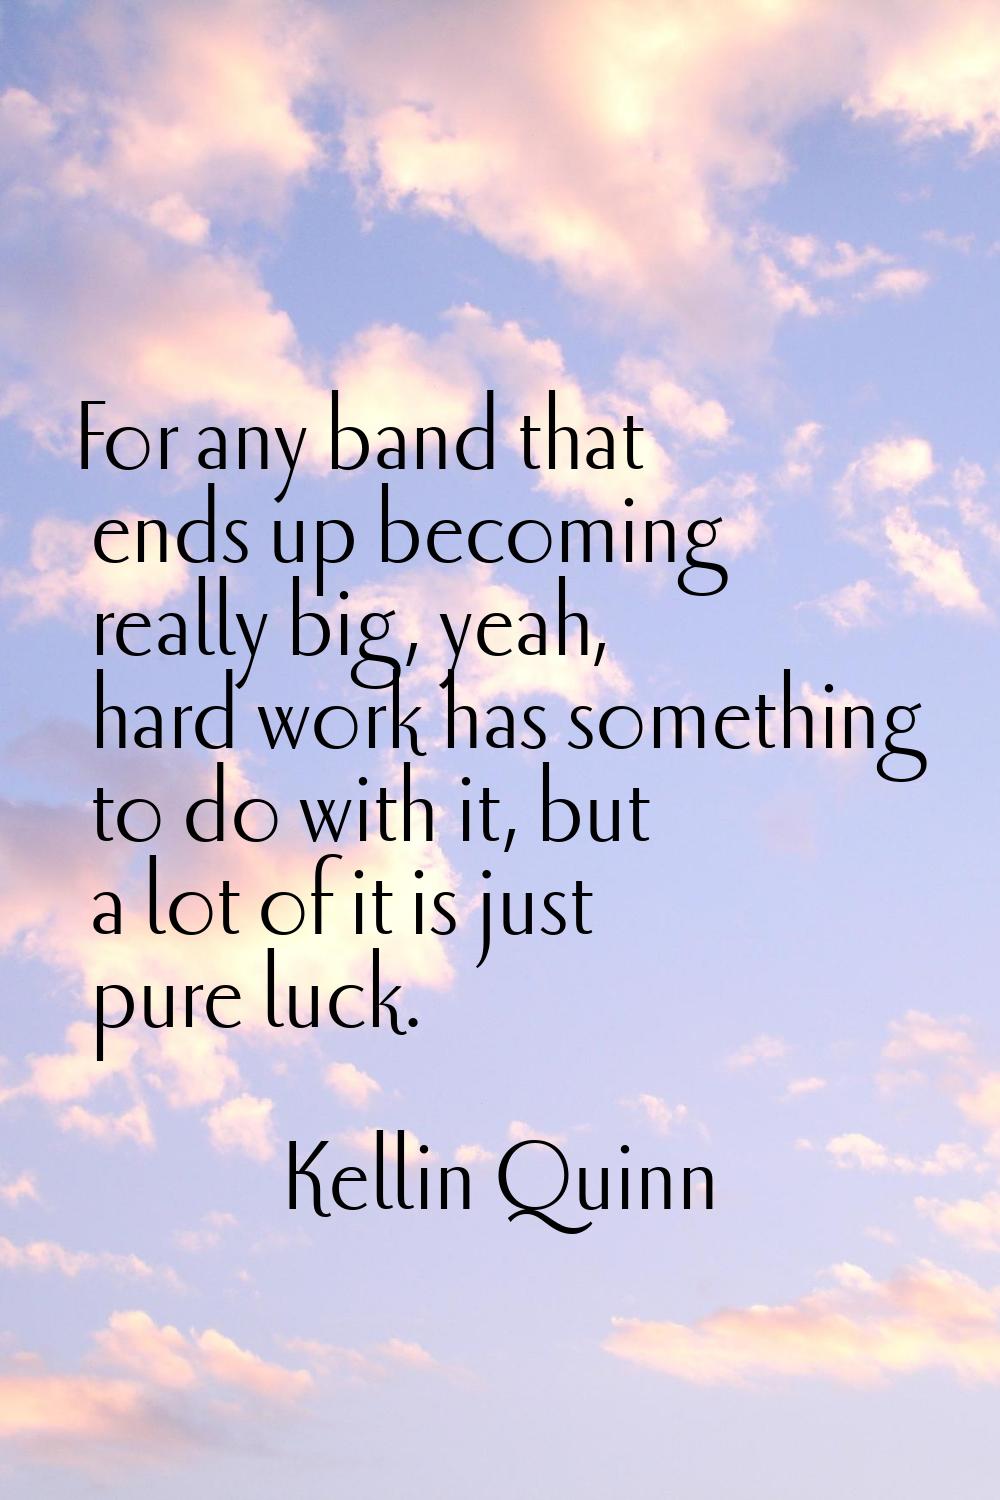 For any band that ends up becoming really big, yeah, hard work has something to do with it, but a l